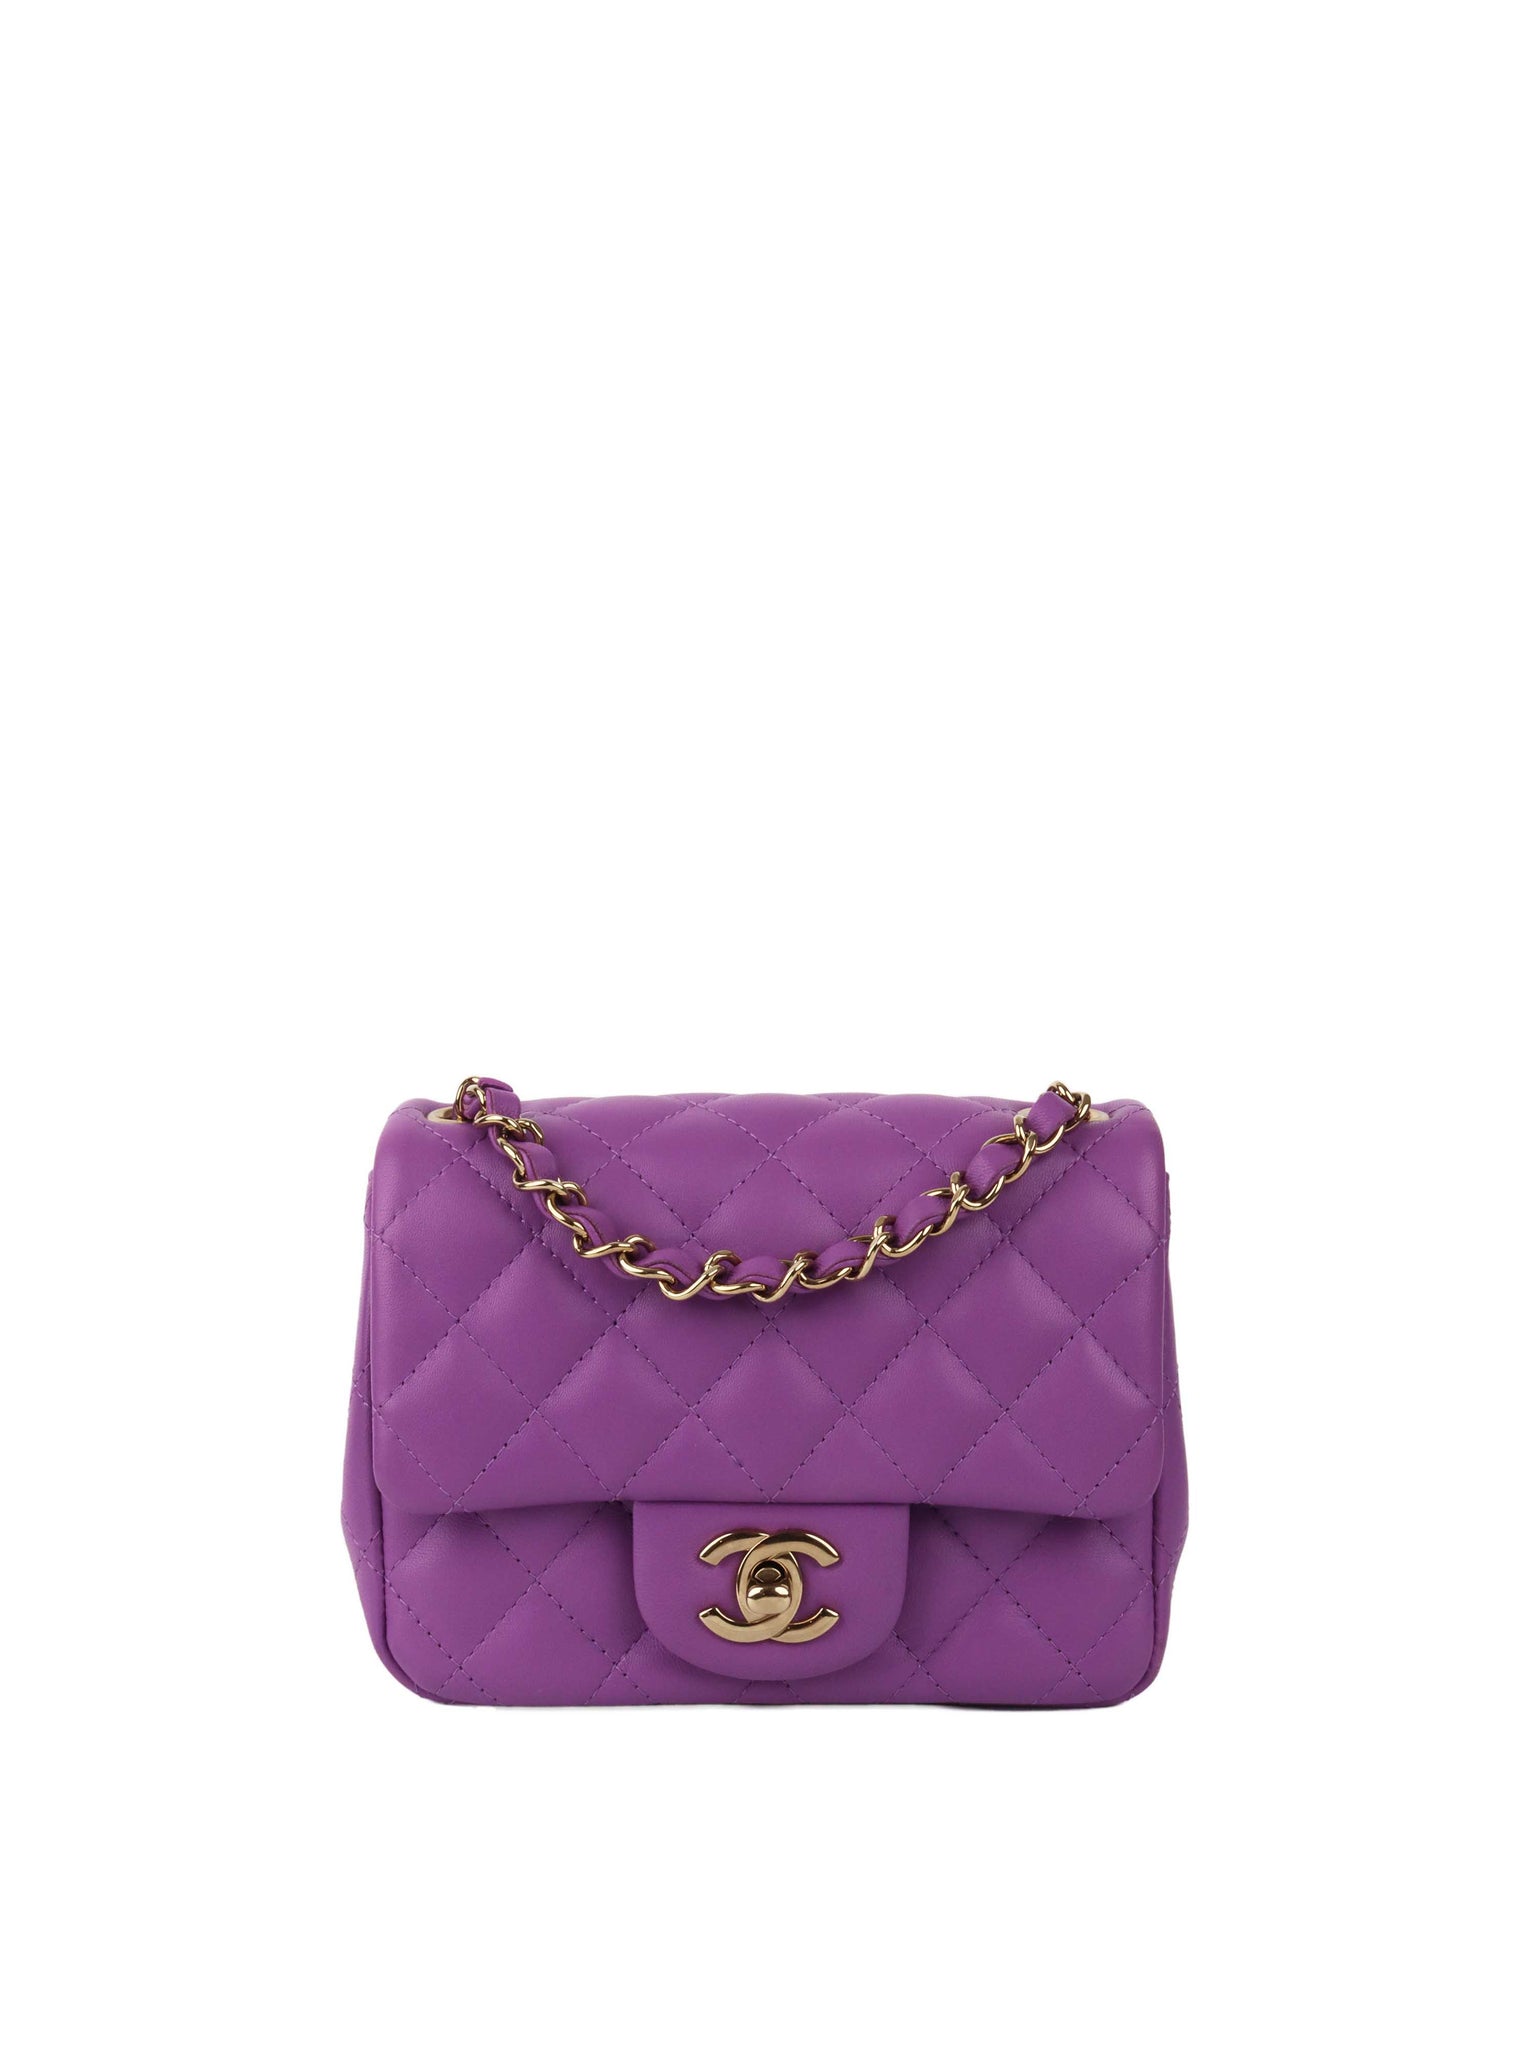 Chanel Classic Small Double Flap 22C Pink Caviar Leather, Gold Hardware,  New In Box P - Julia Rose Boston